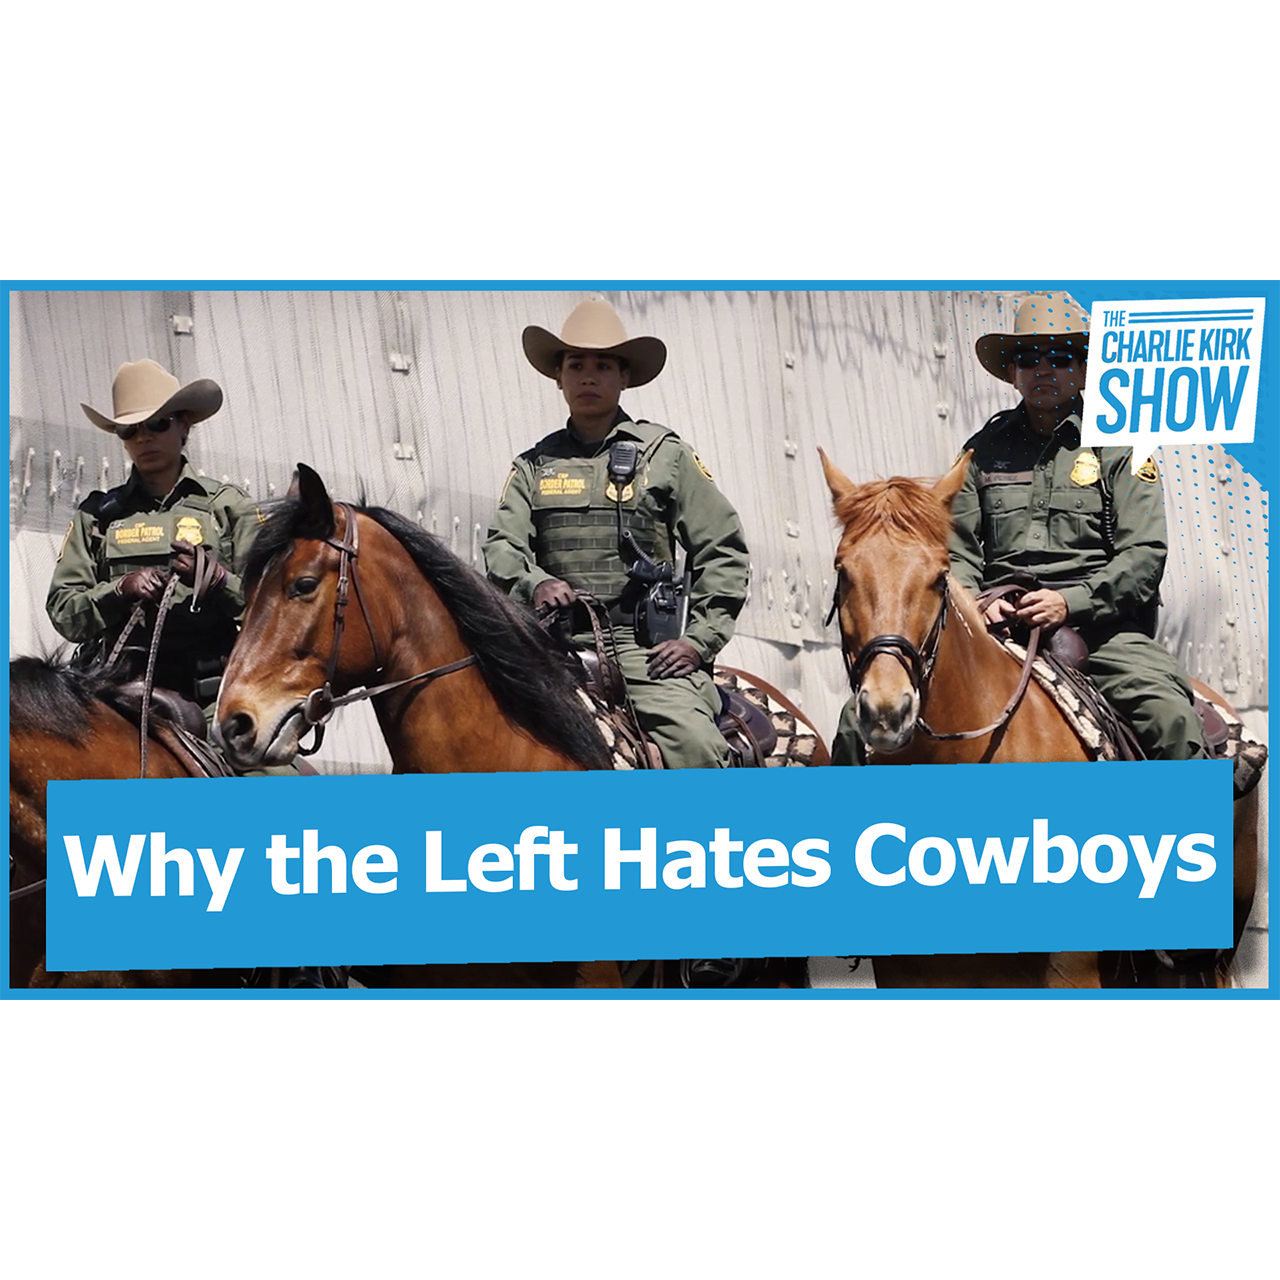 Why the Left Hates Cowboys